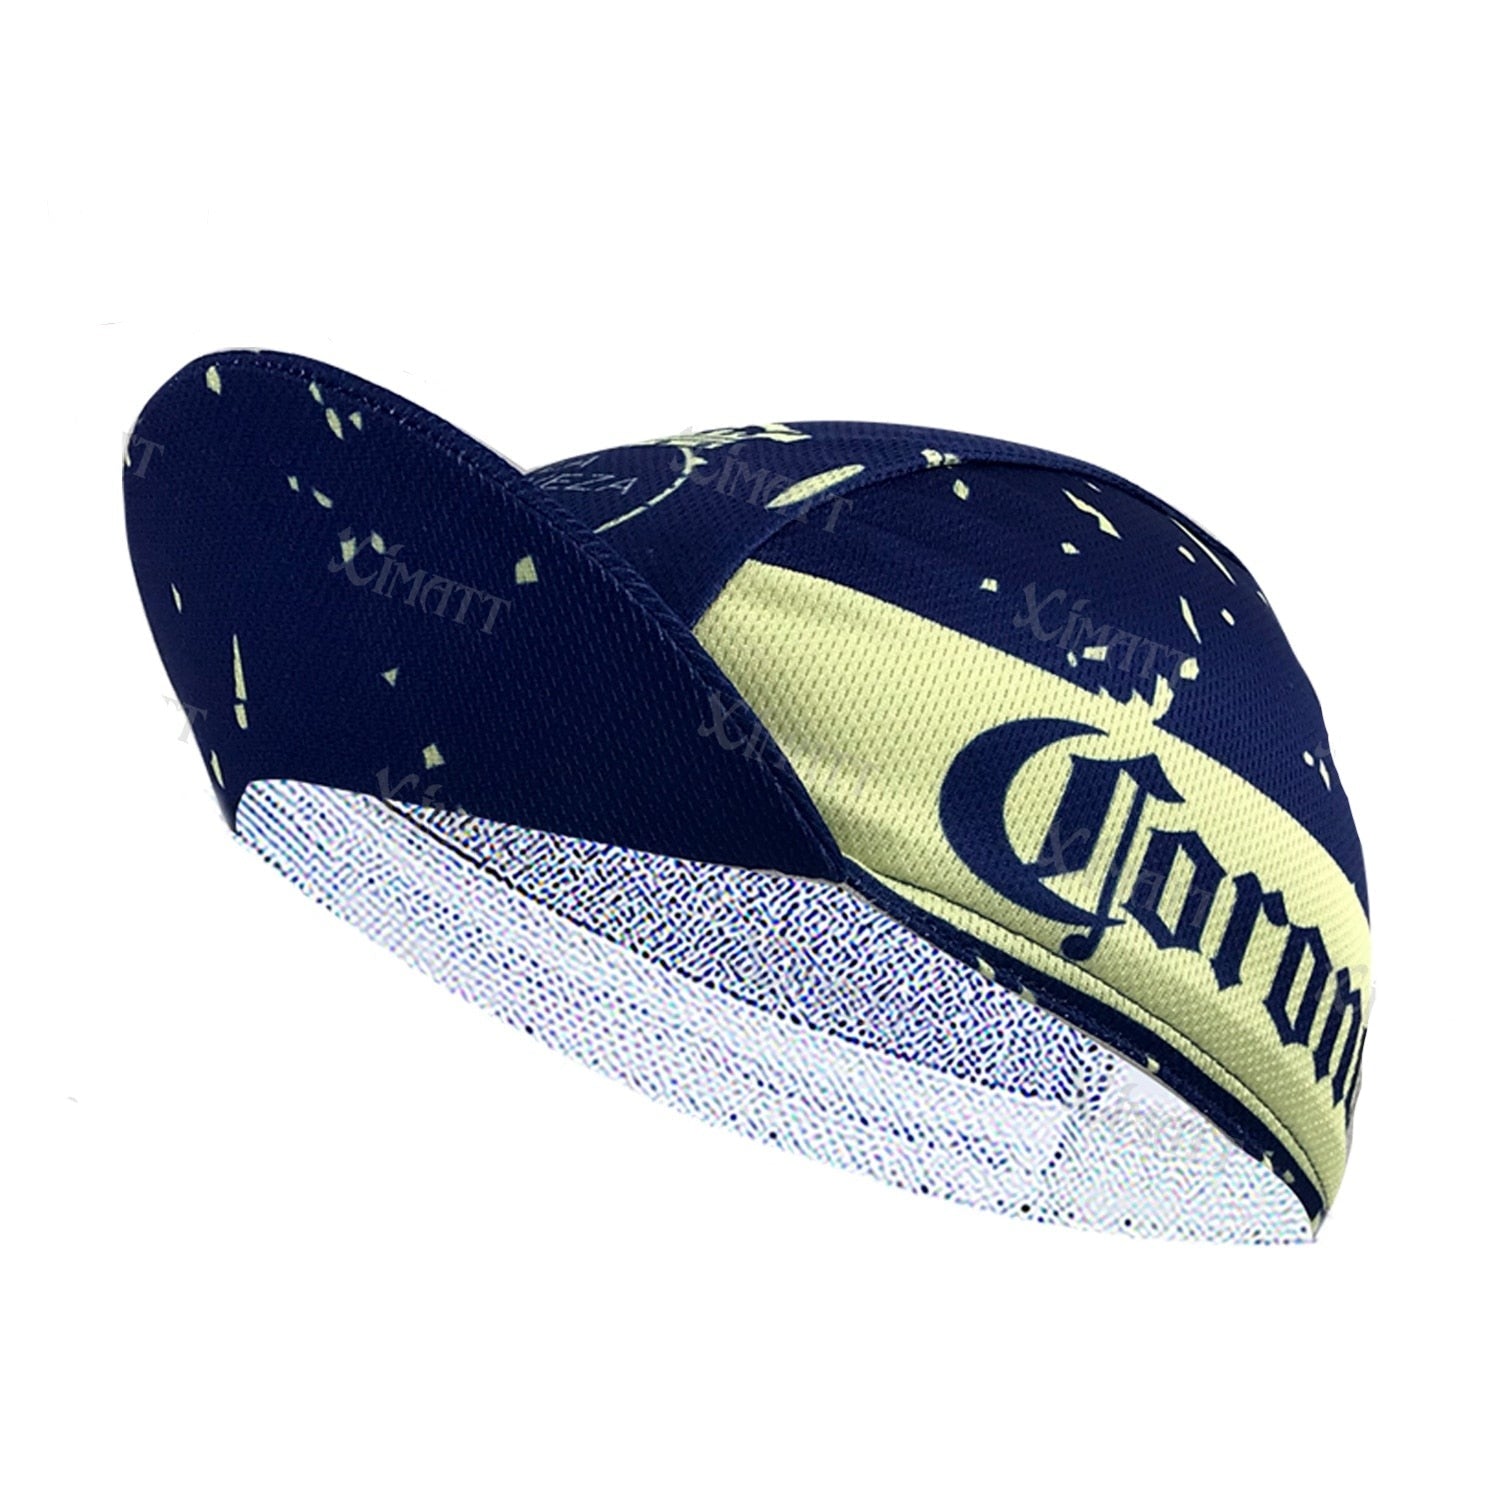 Retro Beer Series Polyester Cycling Cap Quick Dry Sweat Wicking Apply To Road Bike Motorcycle Run More Outdoor Sports